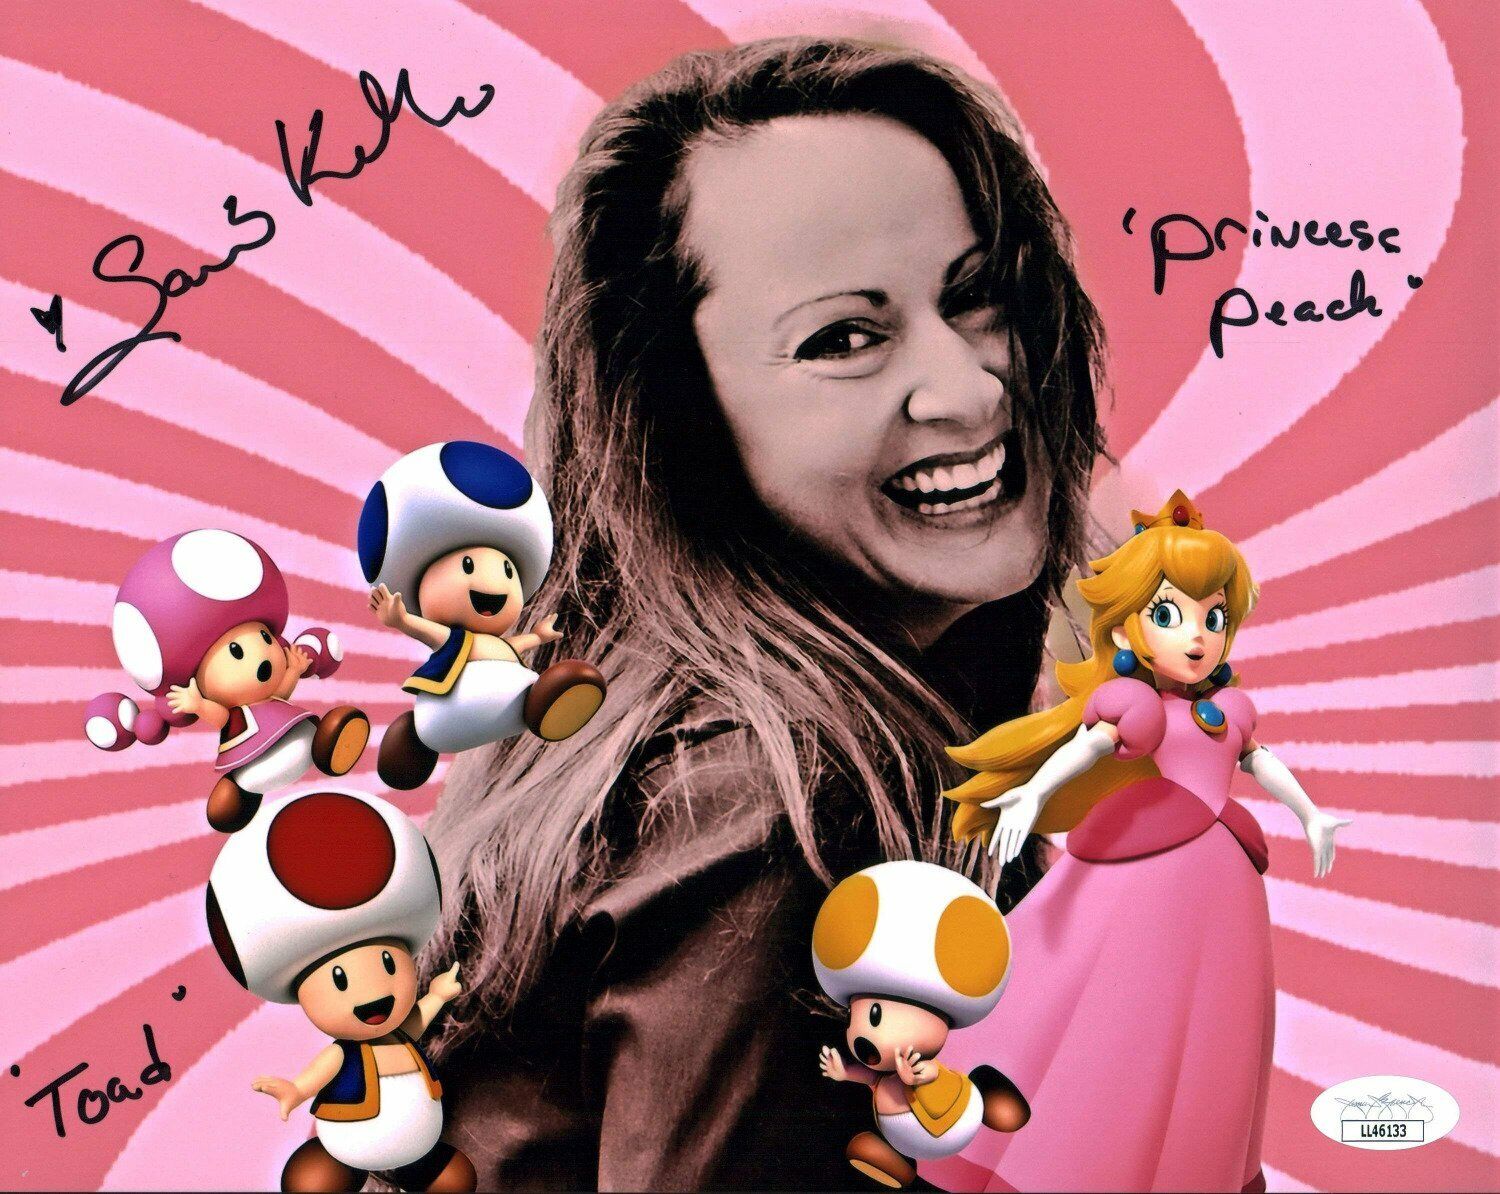 Samantha Kelly Super Mario 8x10 Photo Poster painting Signed Autograph JSA Certified COA Auto